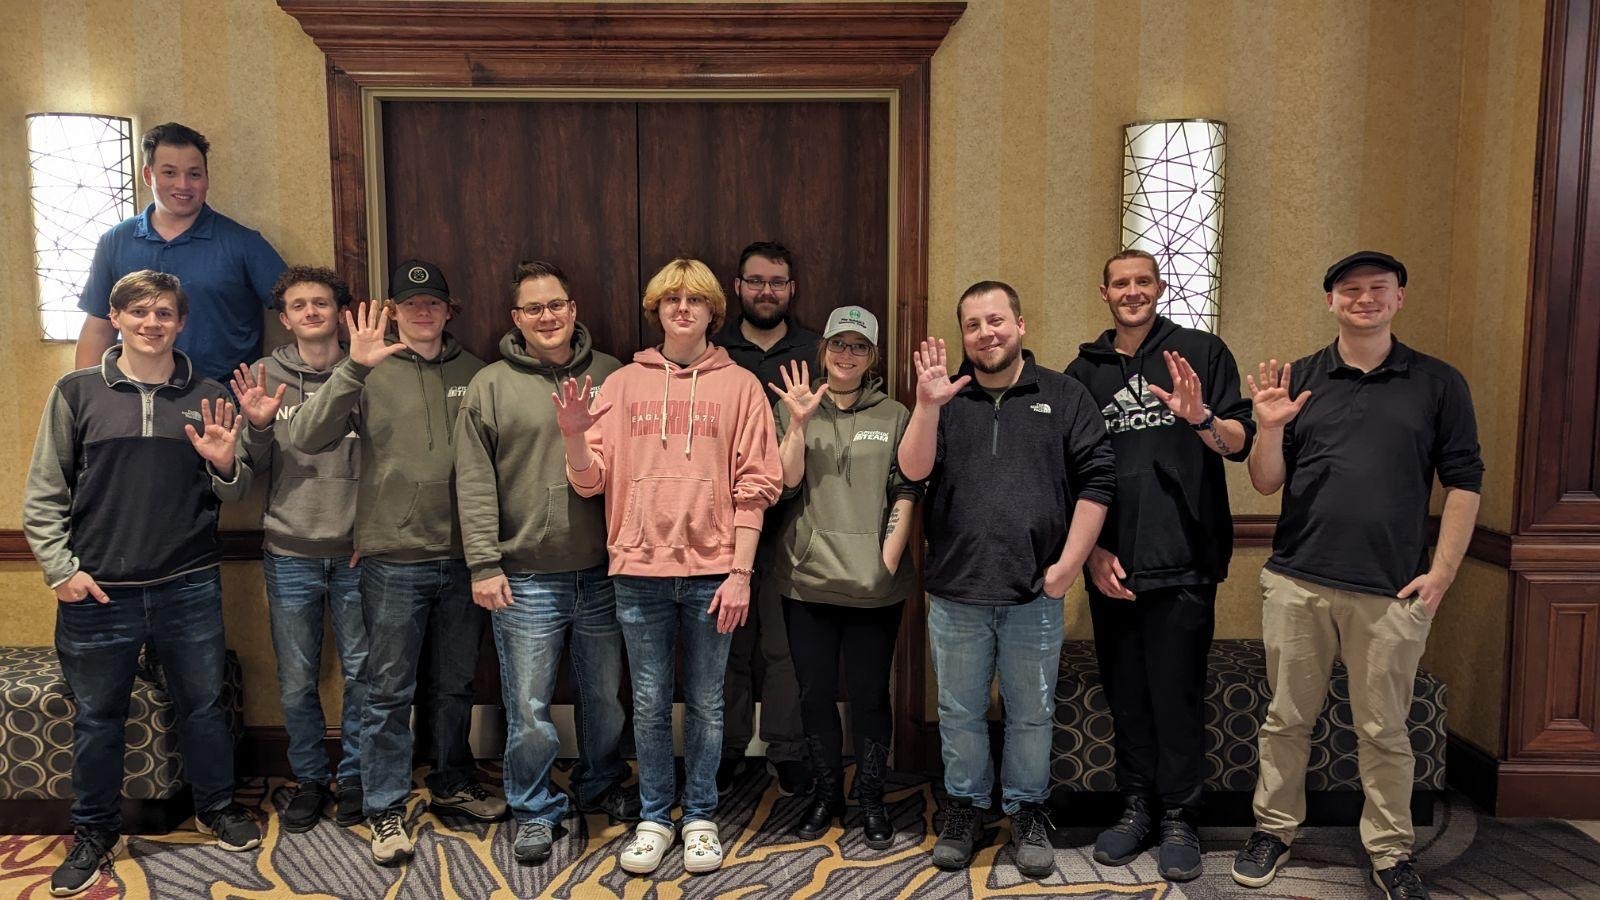 PTCC Takes Fifth at Midwest Regional Cyber Defense Competition